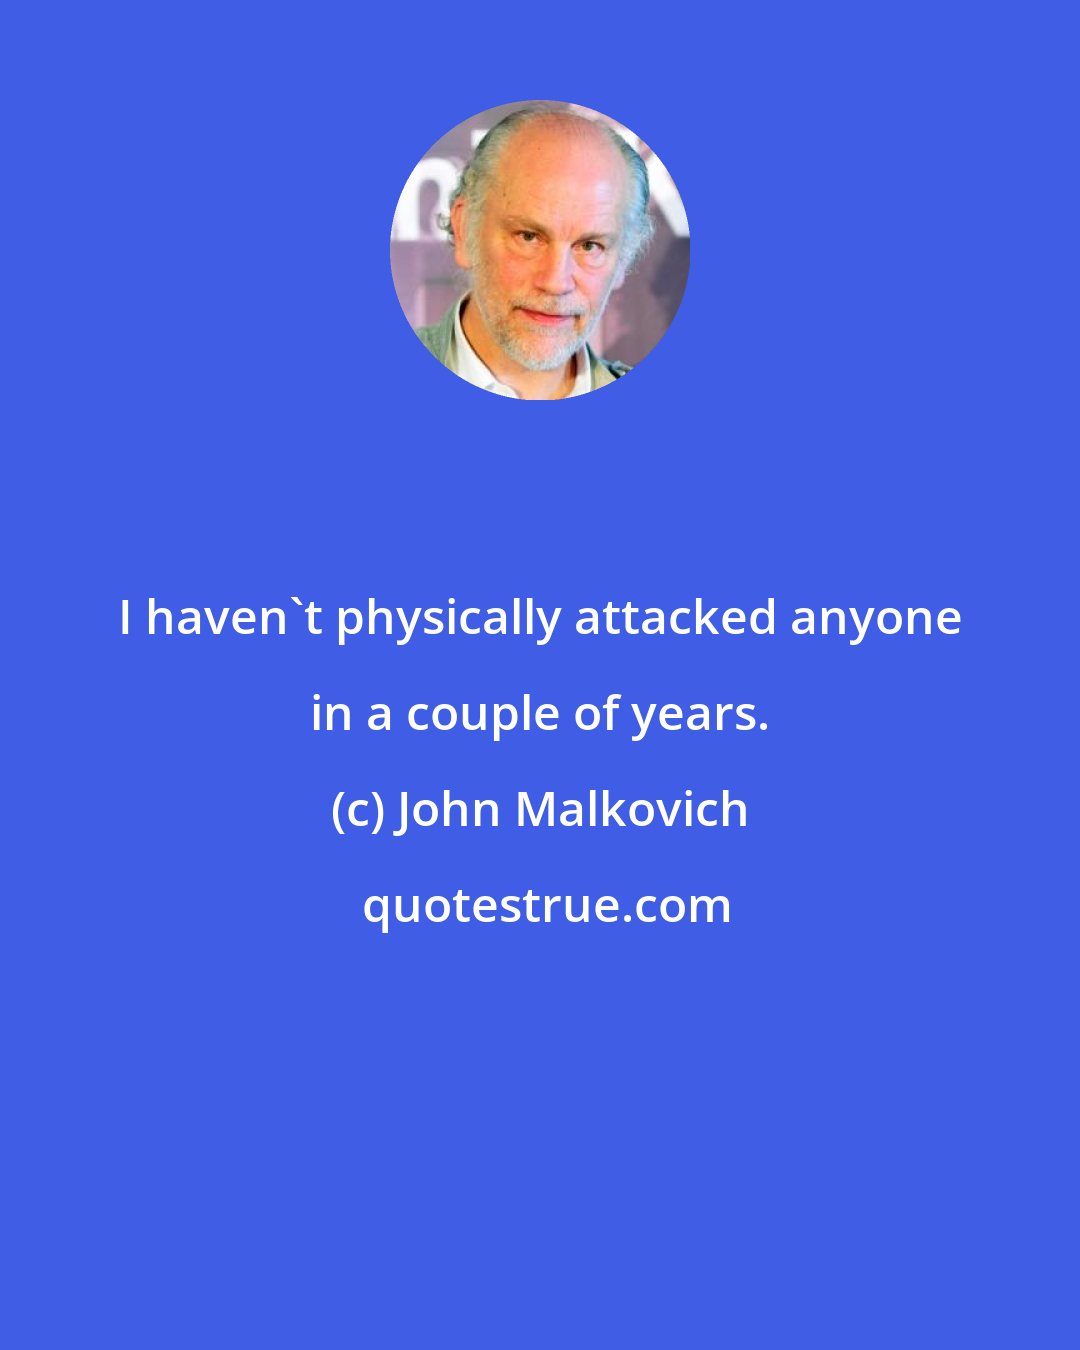 John Malkovich: I haven't physically attacked anyone in a couple of years.